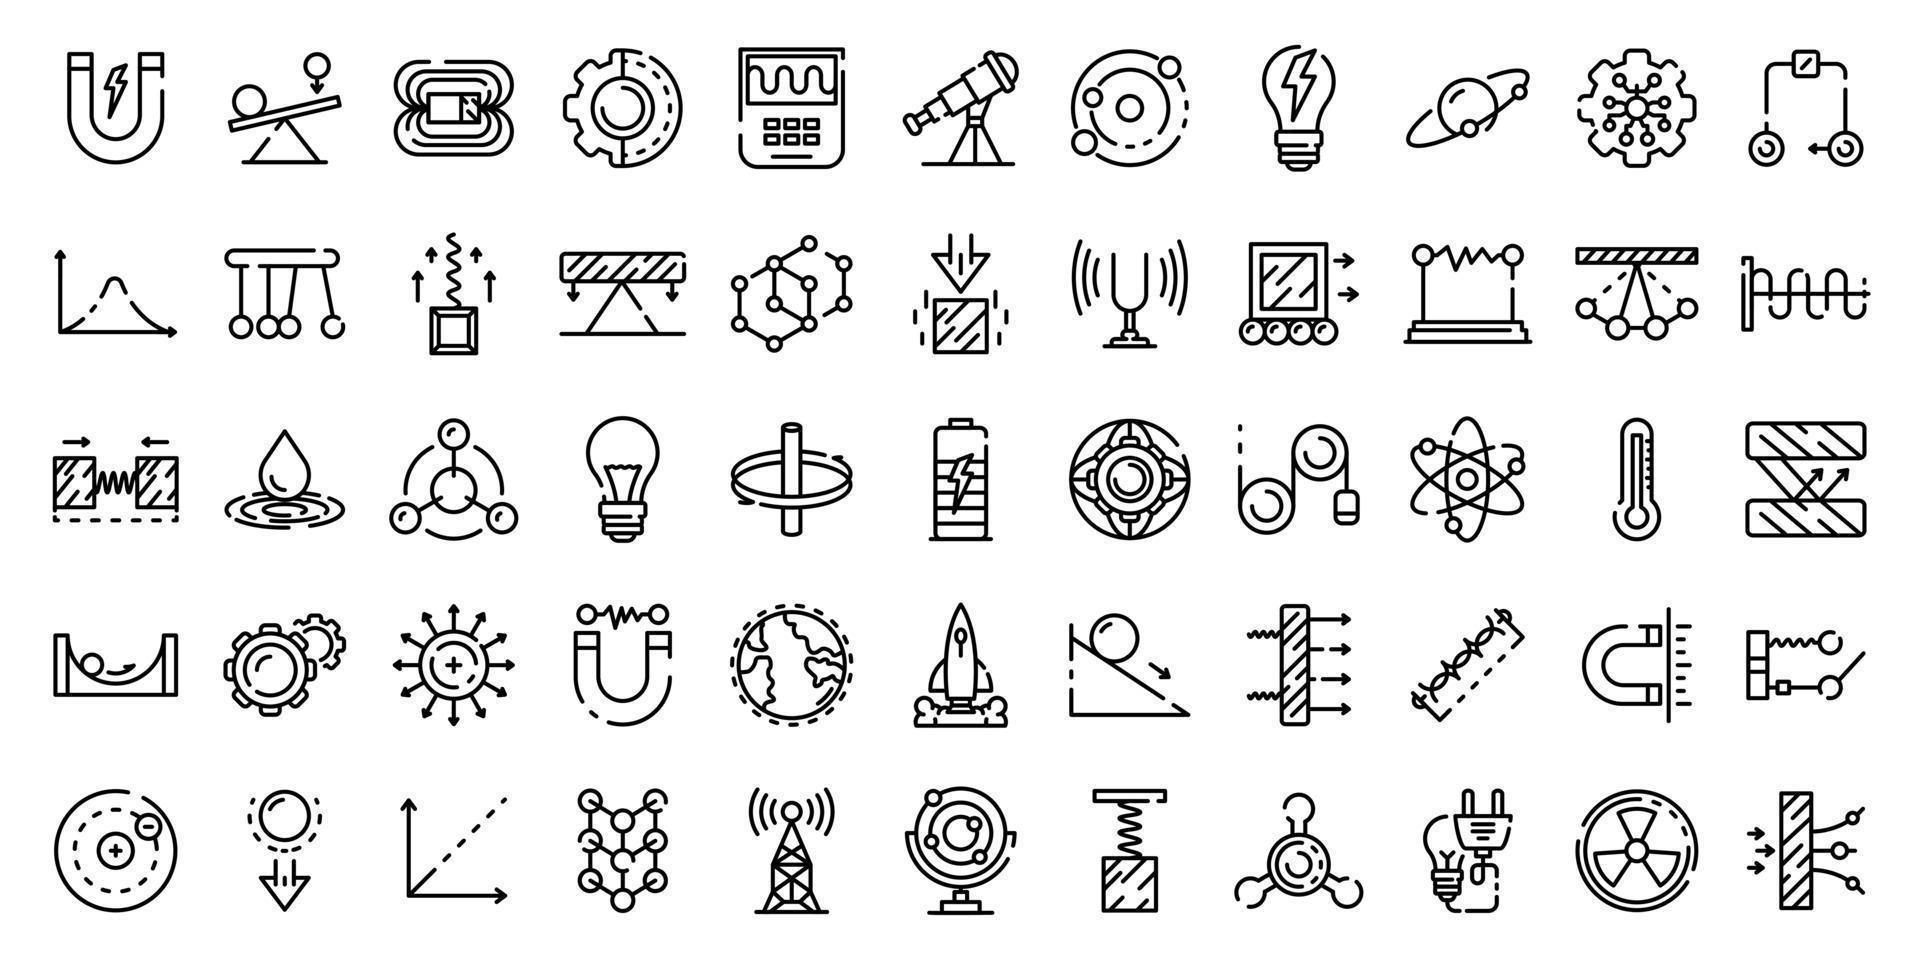 Physics icons set, outline style vector